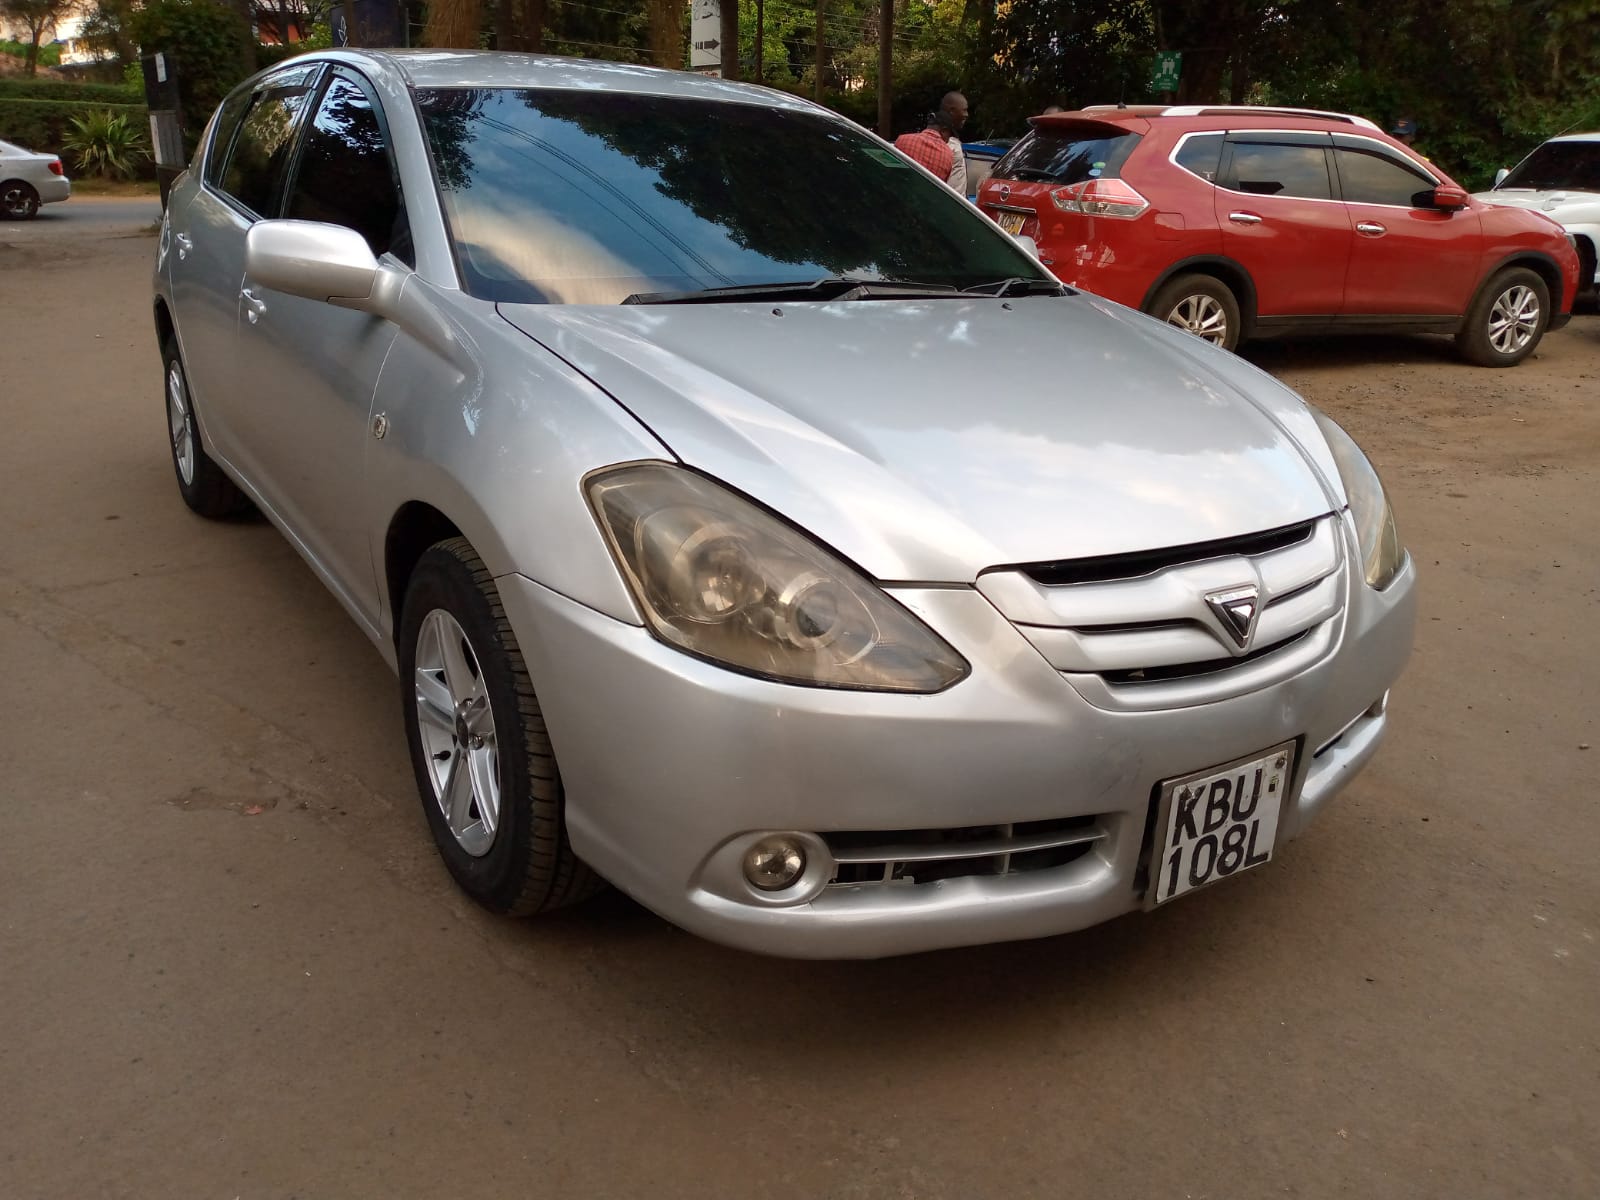 Toyota Caldina 2006 Pay 20%, 80% in 60 months Offer